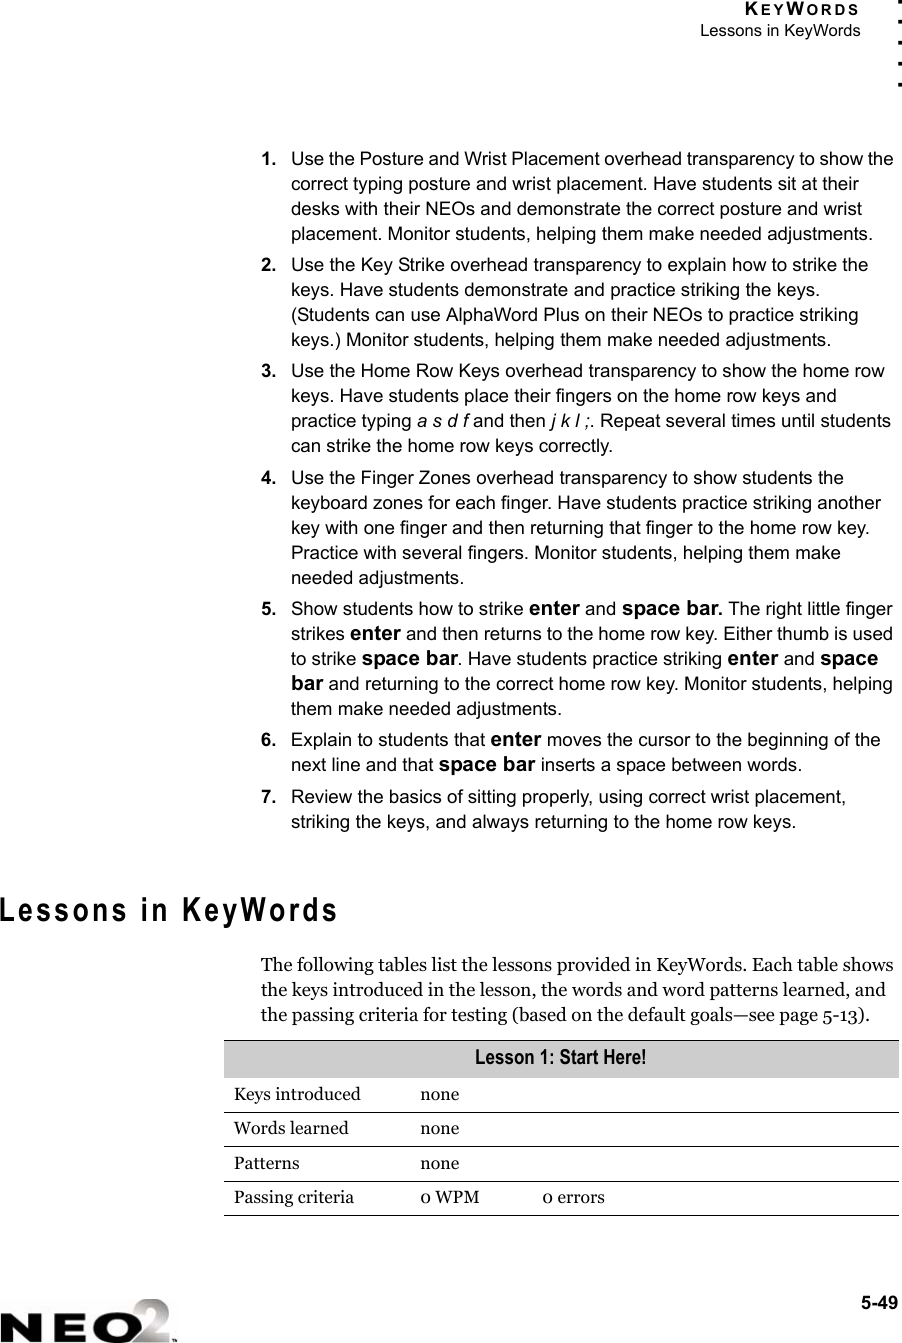 KEYWORDSLessons in KeyWords5-49. . . . .1. Use the Posture and Wrist Placement overhead transparency to show the correct typing posture and wrist placement. Have students sit at their desks with their NEOs and demonstrate the correct posture and wrist placement. Monitor students, helping them make needed adjustments. 2. Use the Key Strike overhead transparency to explain how to strike the keys. Have students demonstrate and practice striking the keys. (Students can use AlphaWord Plus on their NEOs to practice striking keys.) Monitor students, helping them make needed adjustments.3. Use the Home Row Keys overhead transparency to show the home row keys. Have students place their fingers on the home row keys and practice typing a s d f and then j k l ;. Repeat several times until students can strike the home row keys correctly. 4. Use the Finger Zones overhead transparency to show students the keyboard zones for each finger. Have students practice striking another key with one finger and then returning that finger to the home row key. Practice with several fingers. Monitor students, helping them make needed adjustments.5. Show students how to strike enter and space bar. The right little finger strikes enter and then returns to the home row key. Either thumb is used to strike space bar. Have students practice striking enter and space bar and returning to the correct home row key. Monitor students, helping them make needed adjustments.6. Explain to students that enter moves the cursor to the beginning of the next line and that space bar inserts a space between words.7. Review the basics of sitting properly, using correct wrist placement, striking the keys, and always returning to the home row keys.Lessons in KeyWordsThe following tables list the lessons provided in KeyWords. Each table shows the keys introduced in the lesson, the words and word patterns learned, and the passing criteria for testing (based on the default goals—see page 5-13).Lesson 1: Start Here!Keys introduced noneWords learned nonePatterns nonePassing criteria 0 WPM 0 errors